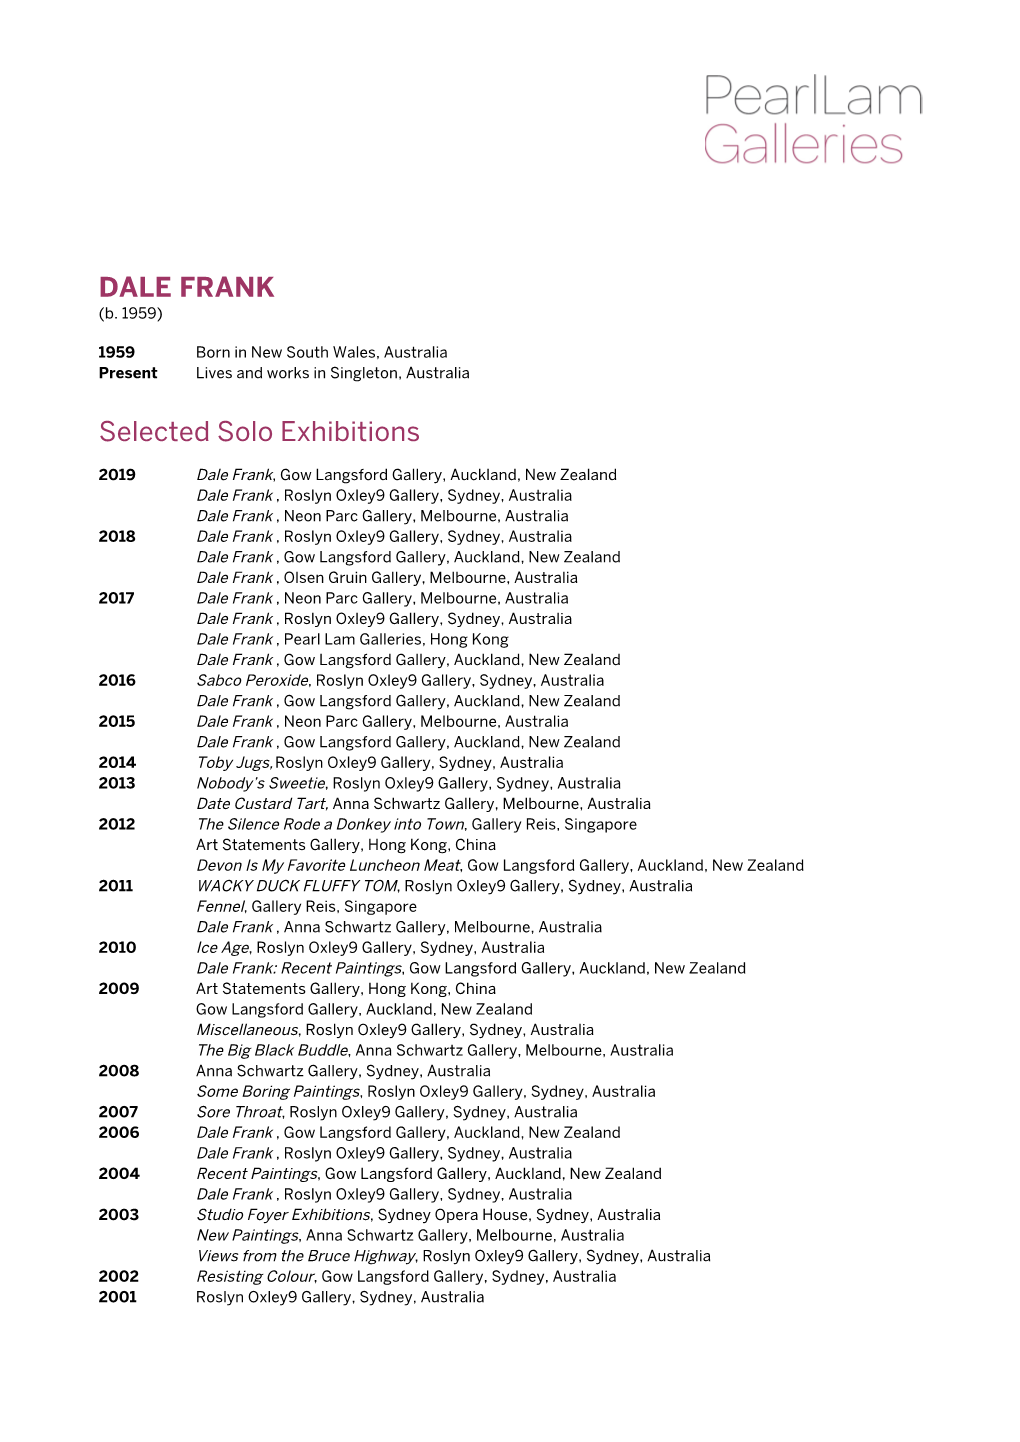 DALE FRANK Selected Solo Exhibitions